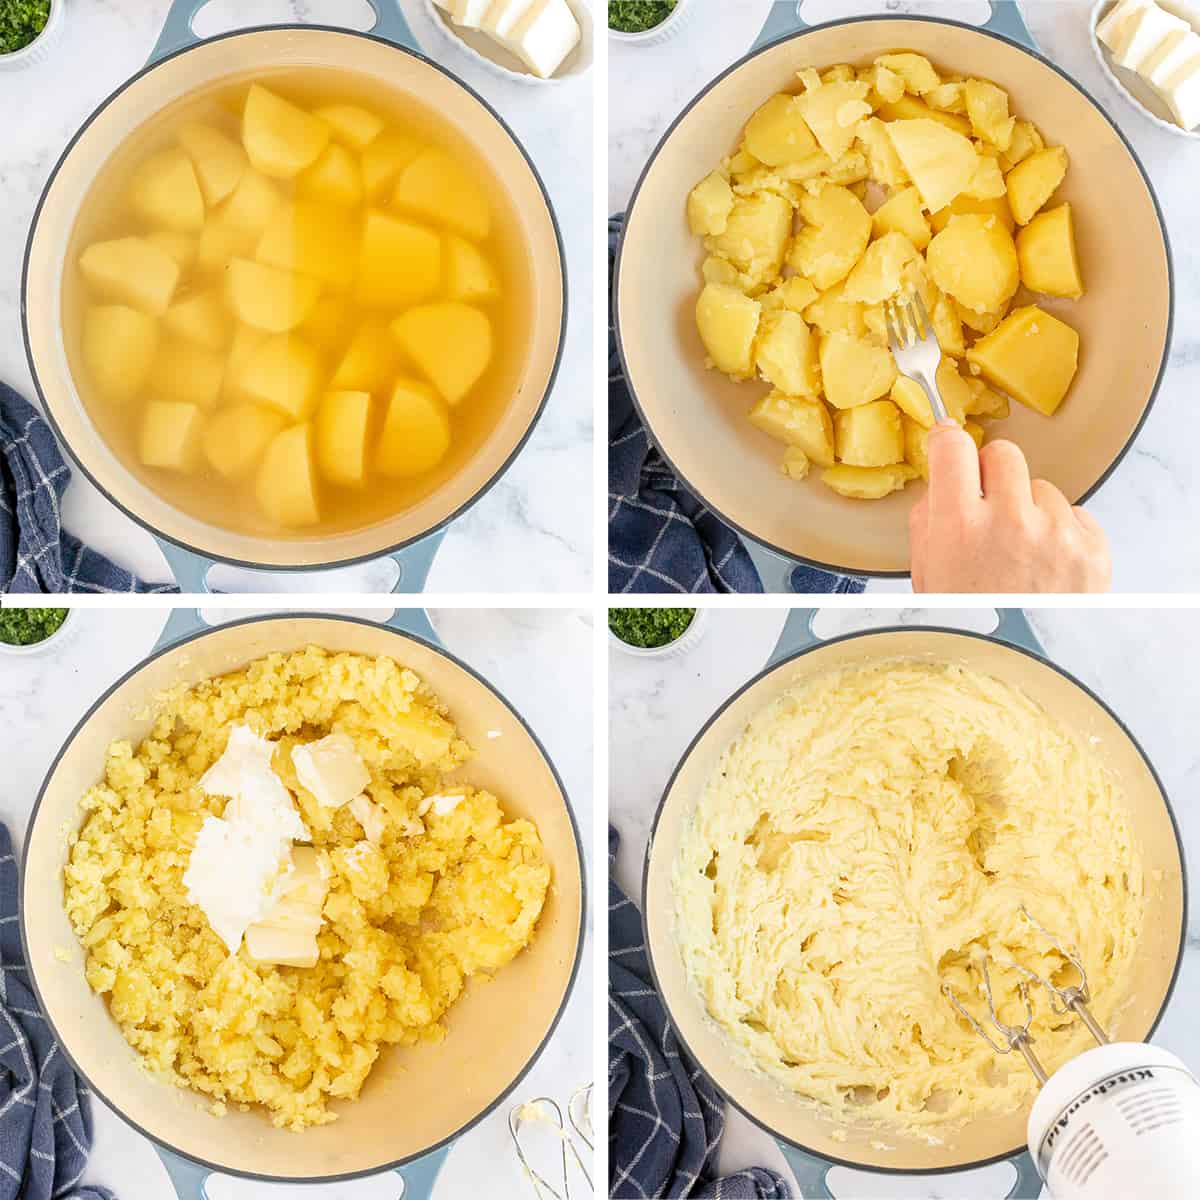 Process images showing potatoes in broth and being mashed with an electric mixer.